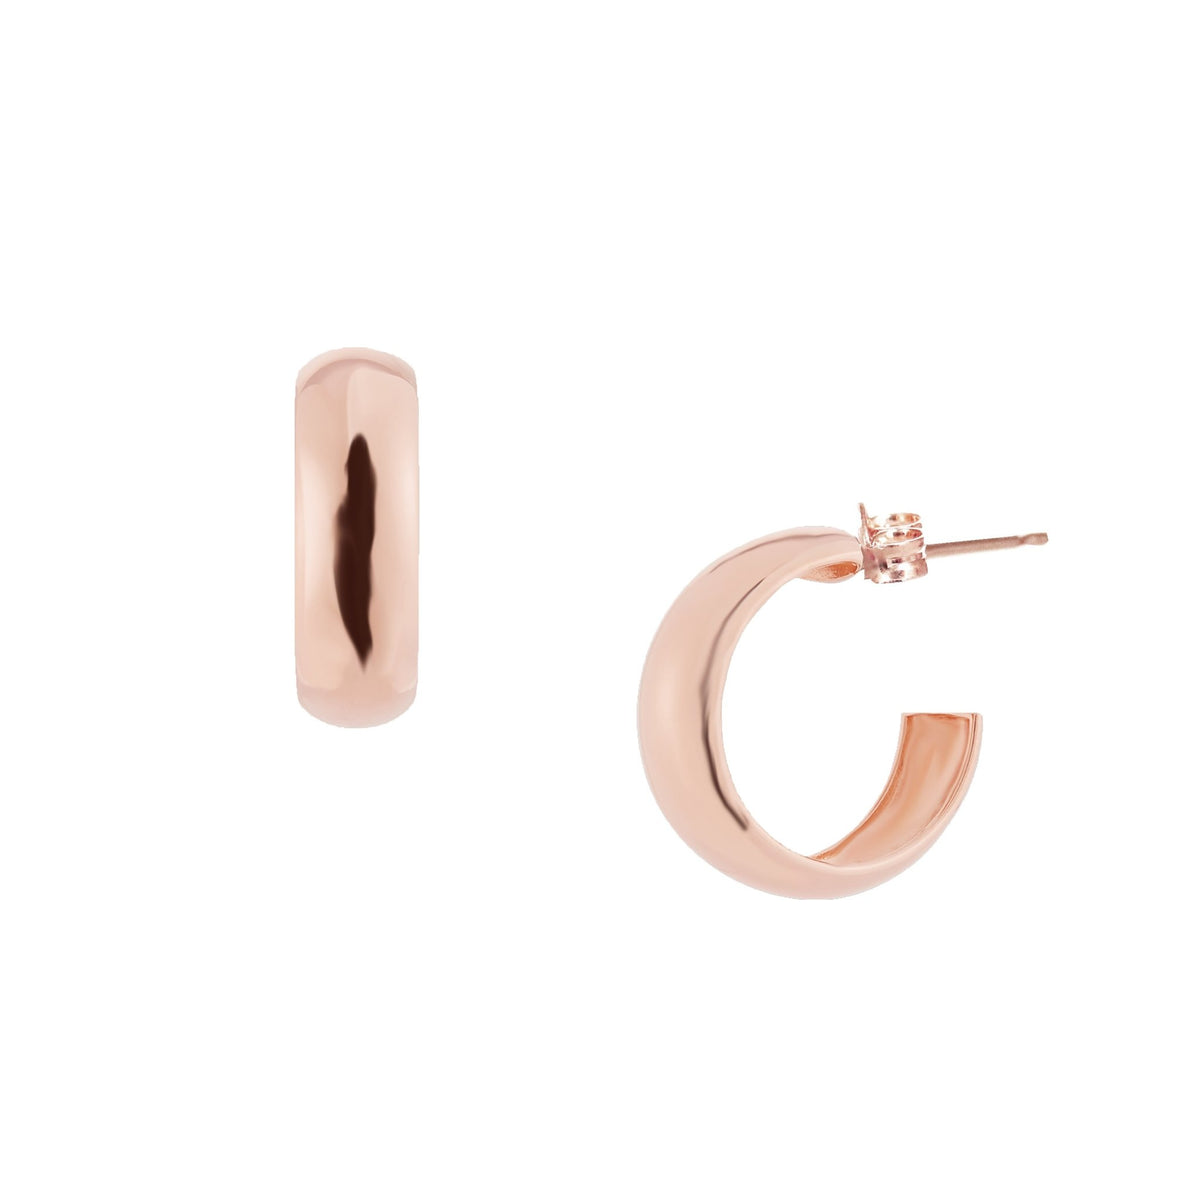 POISE HUGGIE HOOPS - ROSE GOLD - SO PRETTY CARA COTTER